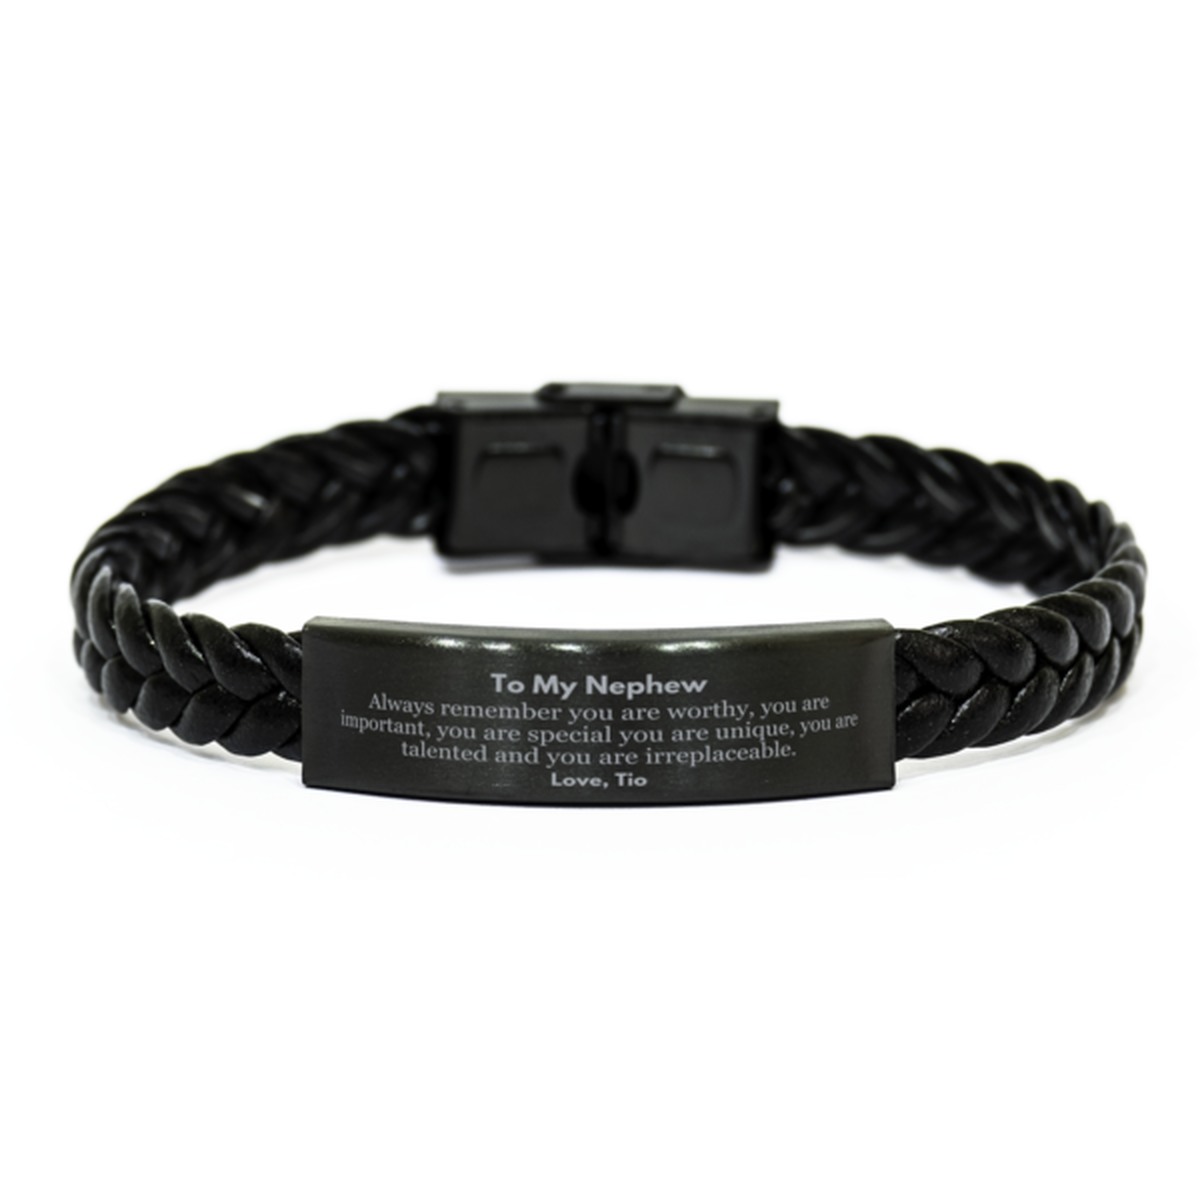 Nephew Birthday Gifts from Tio, Inspirational Braided Leather Bracelet for Nephew Christmas Graduation Gifts for Nephew Always remember you are worthy, you are important. Love, Tio